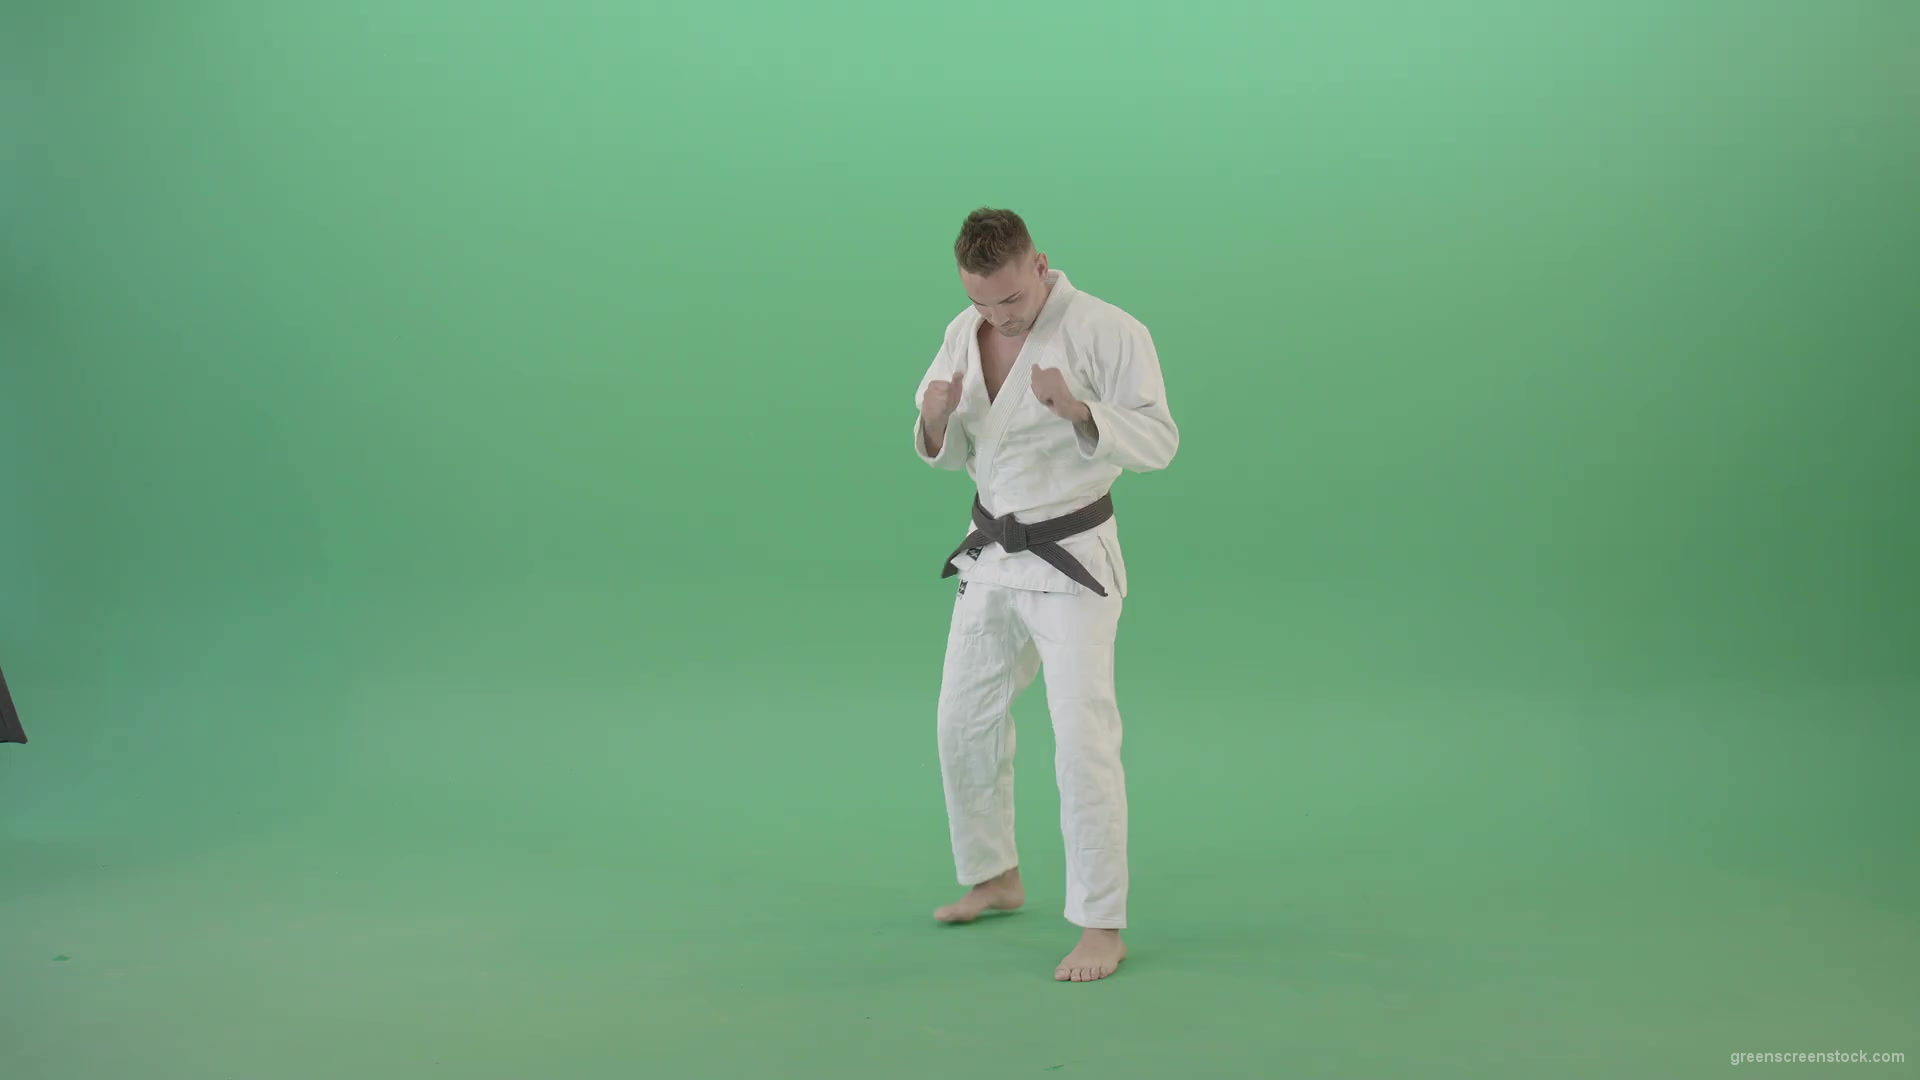 Jujutsu-Sportman-make-front-kick-and-punch-isolated-on-green-screen-4K-Video-Footage-1920_001 Green Screen Stock